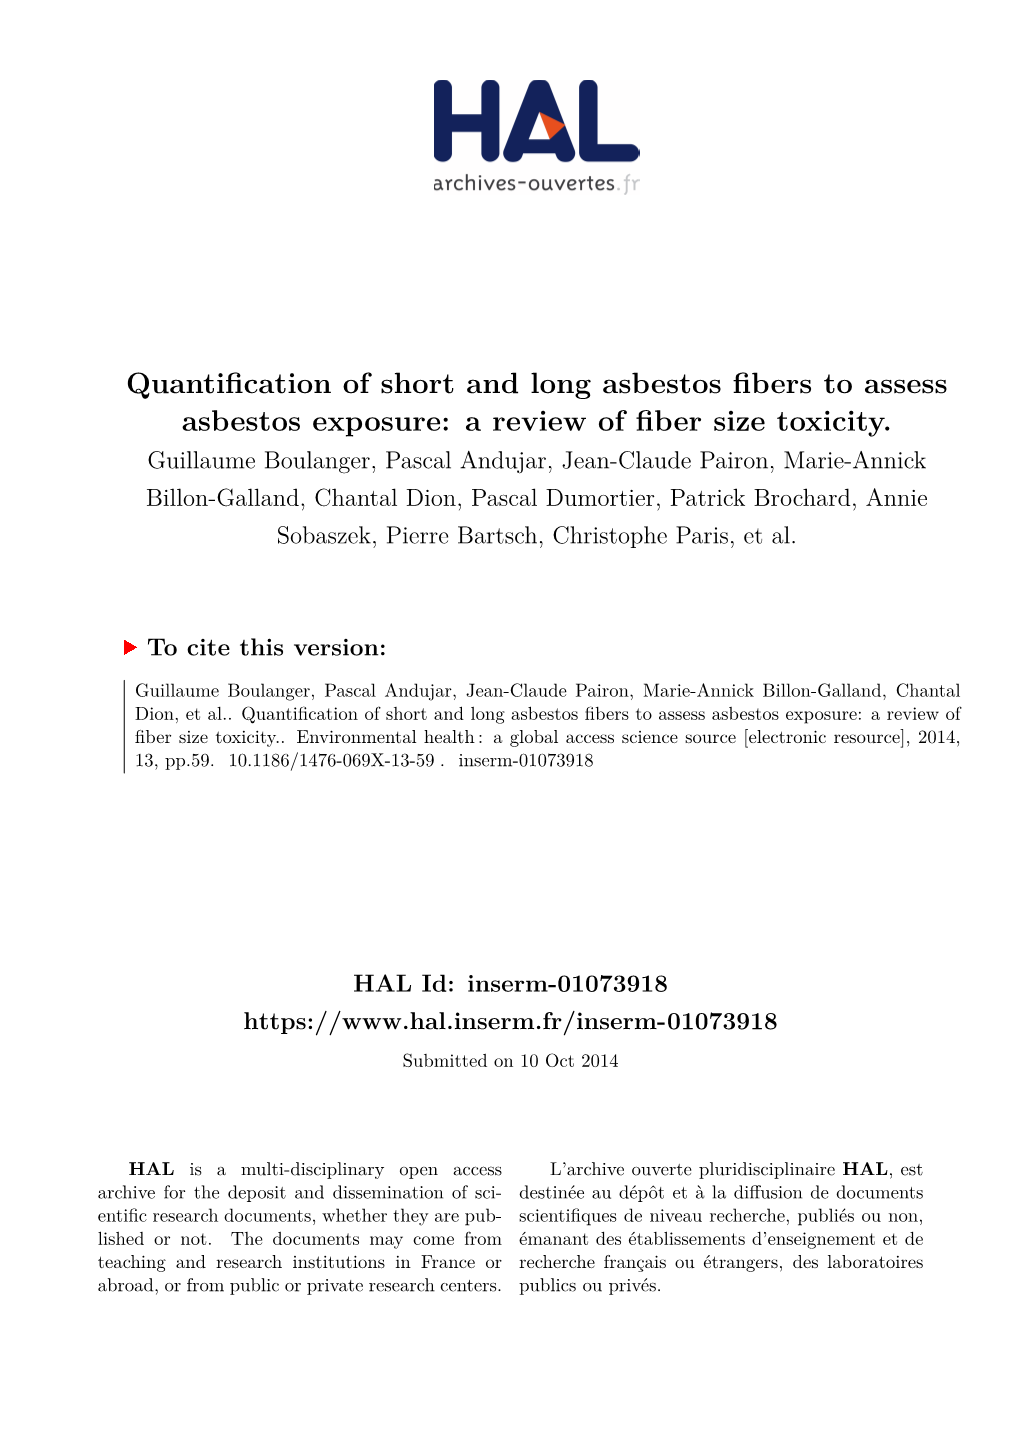 Quantification of Short and Long Asbestos Fibers to Assess Asbestos Exposure: a Review of Fiber Size Toxicity